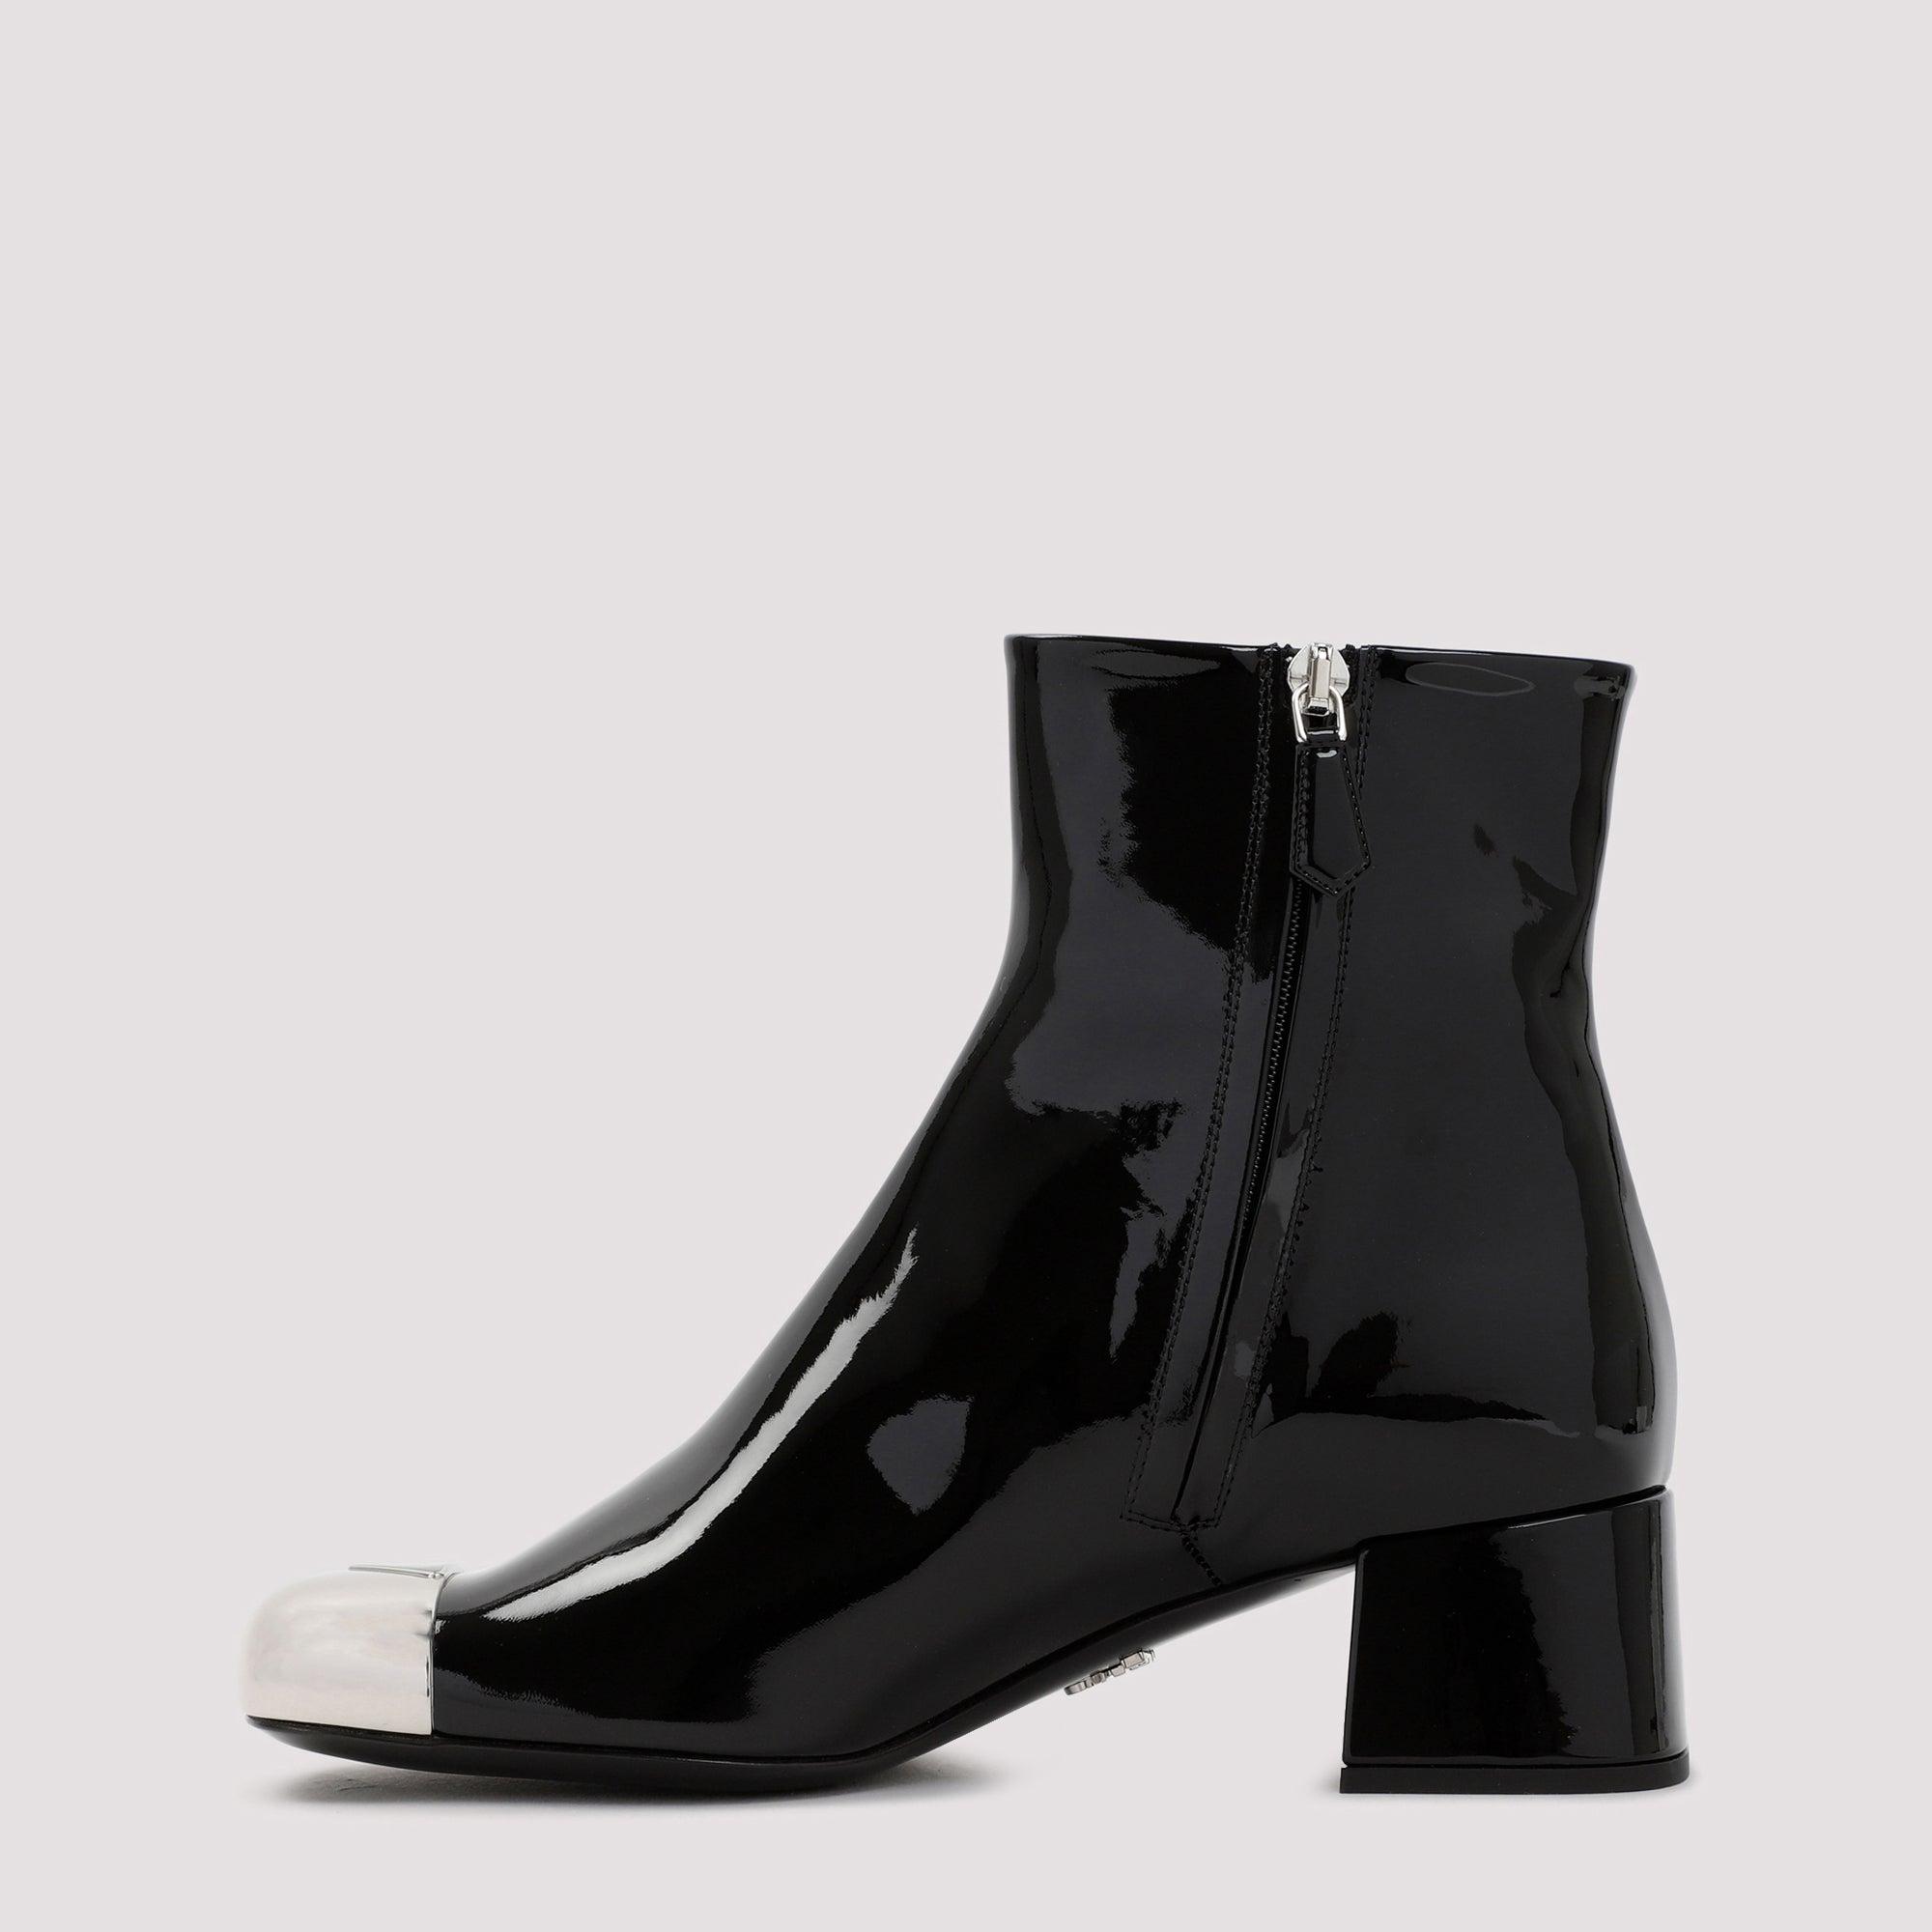 Prada Leather Ankle Boots Shoes in Black | Lyst